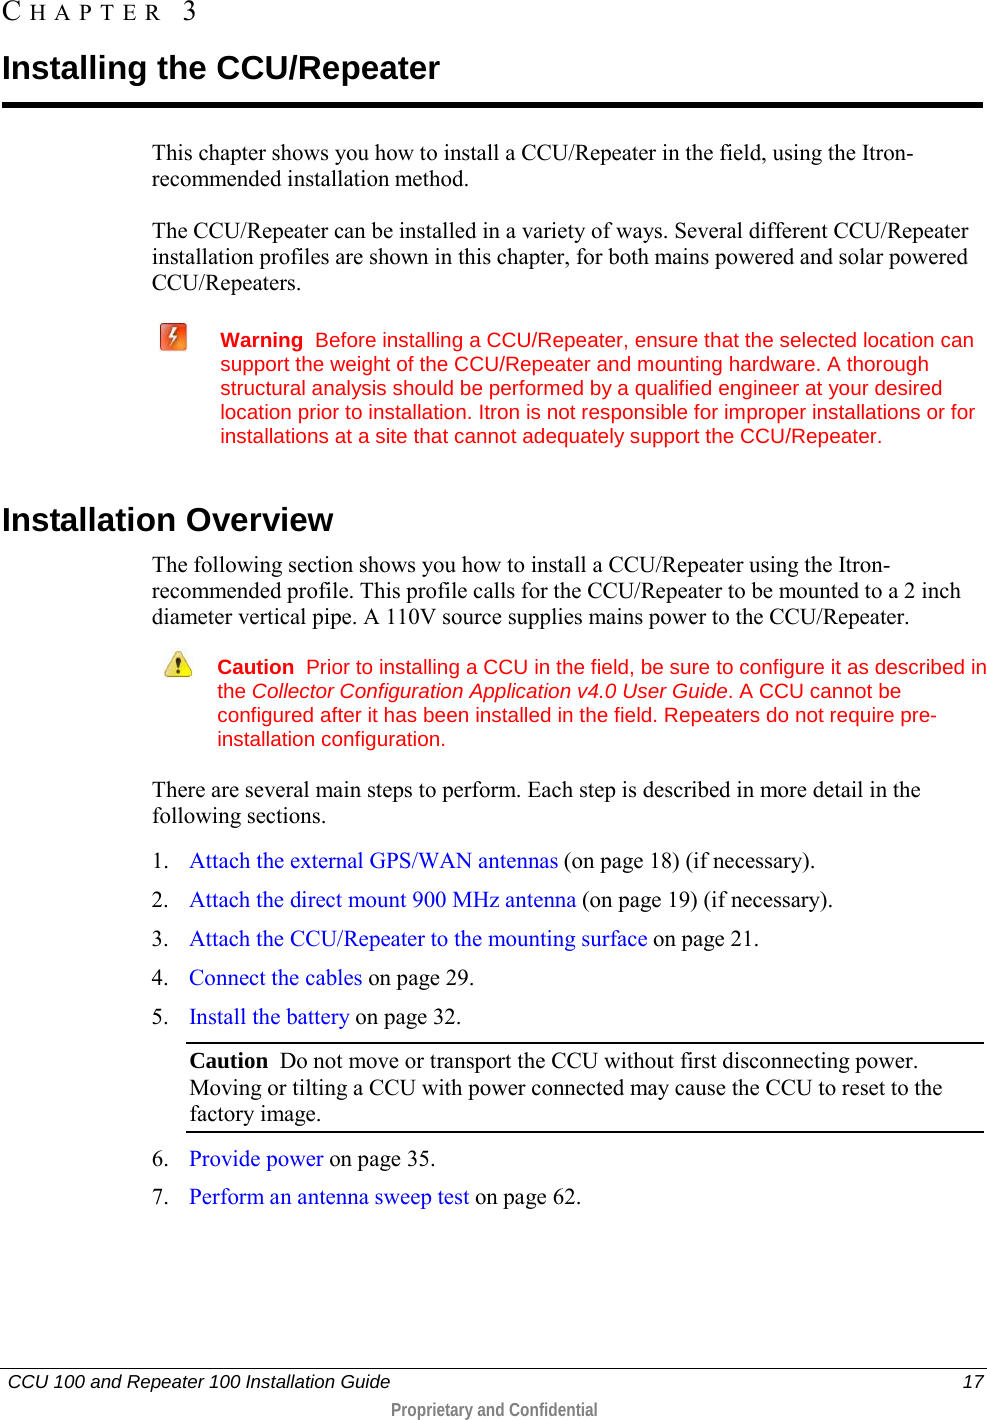   CCU 100 and Repeater 100 Installation Guide    17  Proprietary and Confidential  This chapter shows you how to install a CCU/Repeater in the field, using the Itron-recommended installation method.  The CCU/Repeater can be installed in a variety of ways. Several different CCU/Repeater installation profiles are shown in this chapter, for both mains powered and solar powered CCU/Repeaters.   Warning  Before installing a CCU/Repeater, ensure that the selected location can support the weight of the CCU/Repeater and mounting hardware. A thorough structural analysis should be performed by a qualified engineer at your desired location prior to installation. Itron is not responsible for improper installations or for installations at a site that cannot adequately support the CCU/Repeater.   Installation Overview The following section shows you how to install a CCU/Repeater using the Itron-recommended profile. This profile calls for the CCU/Repeater to be mounted to a 2 inch diameter vertical pipe. A 110V source supplies mains power to the CCU/Repeater.   Caution  Prior to installing a CCU in the field, be sure to configure it as described in the Collector Configuration Application v4.0 User Guide. A CCU cannot be configured after it has been installed in the field. Repeaters do not require pre-installation configuration. There are several main steps to perform. Each step is described in more detail in the following sections.  1. Attach the external GPS/WAN antennas (on page 18) (if necessary). 2. Attach the direct mount 900 MHz antenna (on page 19) (if necessary). 3. Attach the CCU/Repeater to the mounting surface on page 21. 4. Connect the cables on page 29. 5. Install the battery on page 32. Caution  Do not move or transport the CCU without first disconnecting power.  Moving or tilting a CCU with power connected may cause the CCU to reset to the factory image. 6. Provide power on page 35. 7. Perform an antenna sweep test on page 62.  CHAPTER  3  Installing the CCU/Repeater 